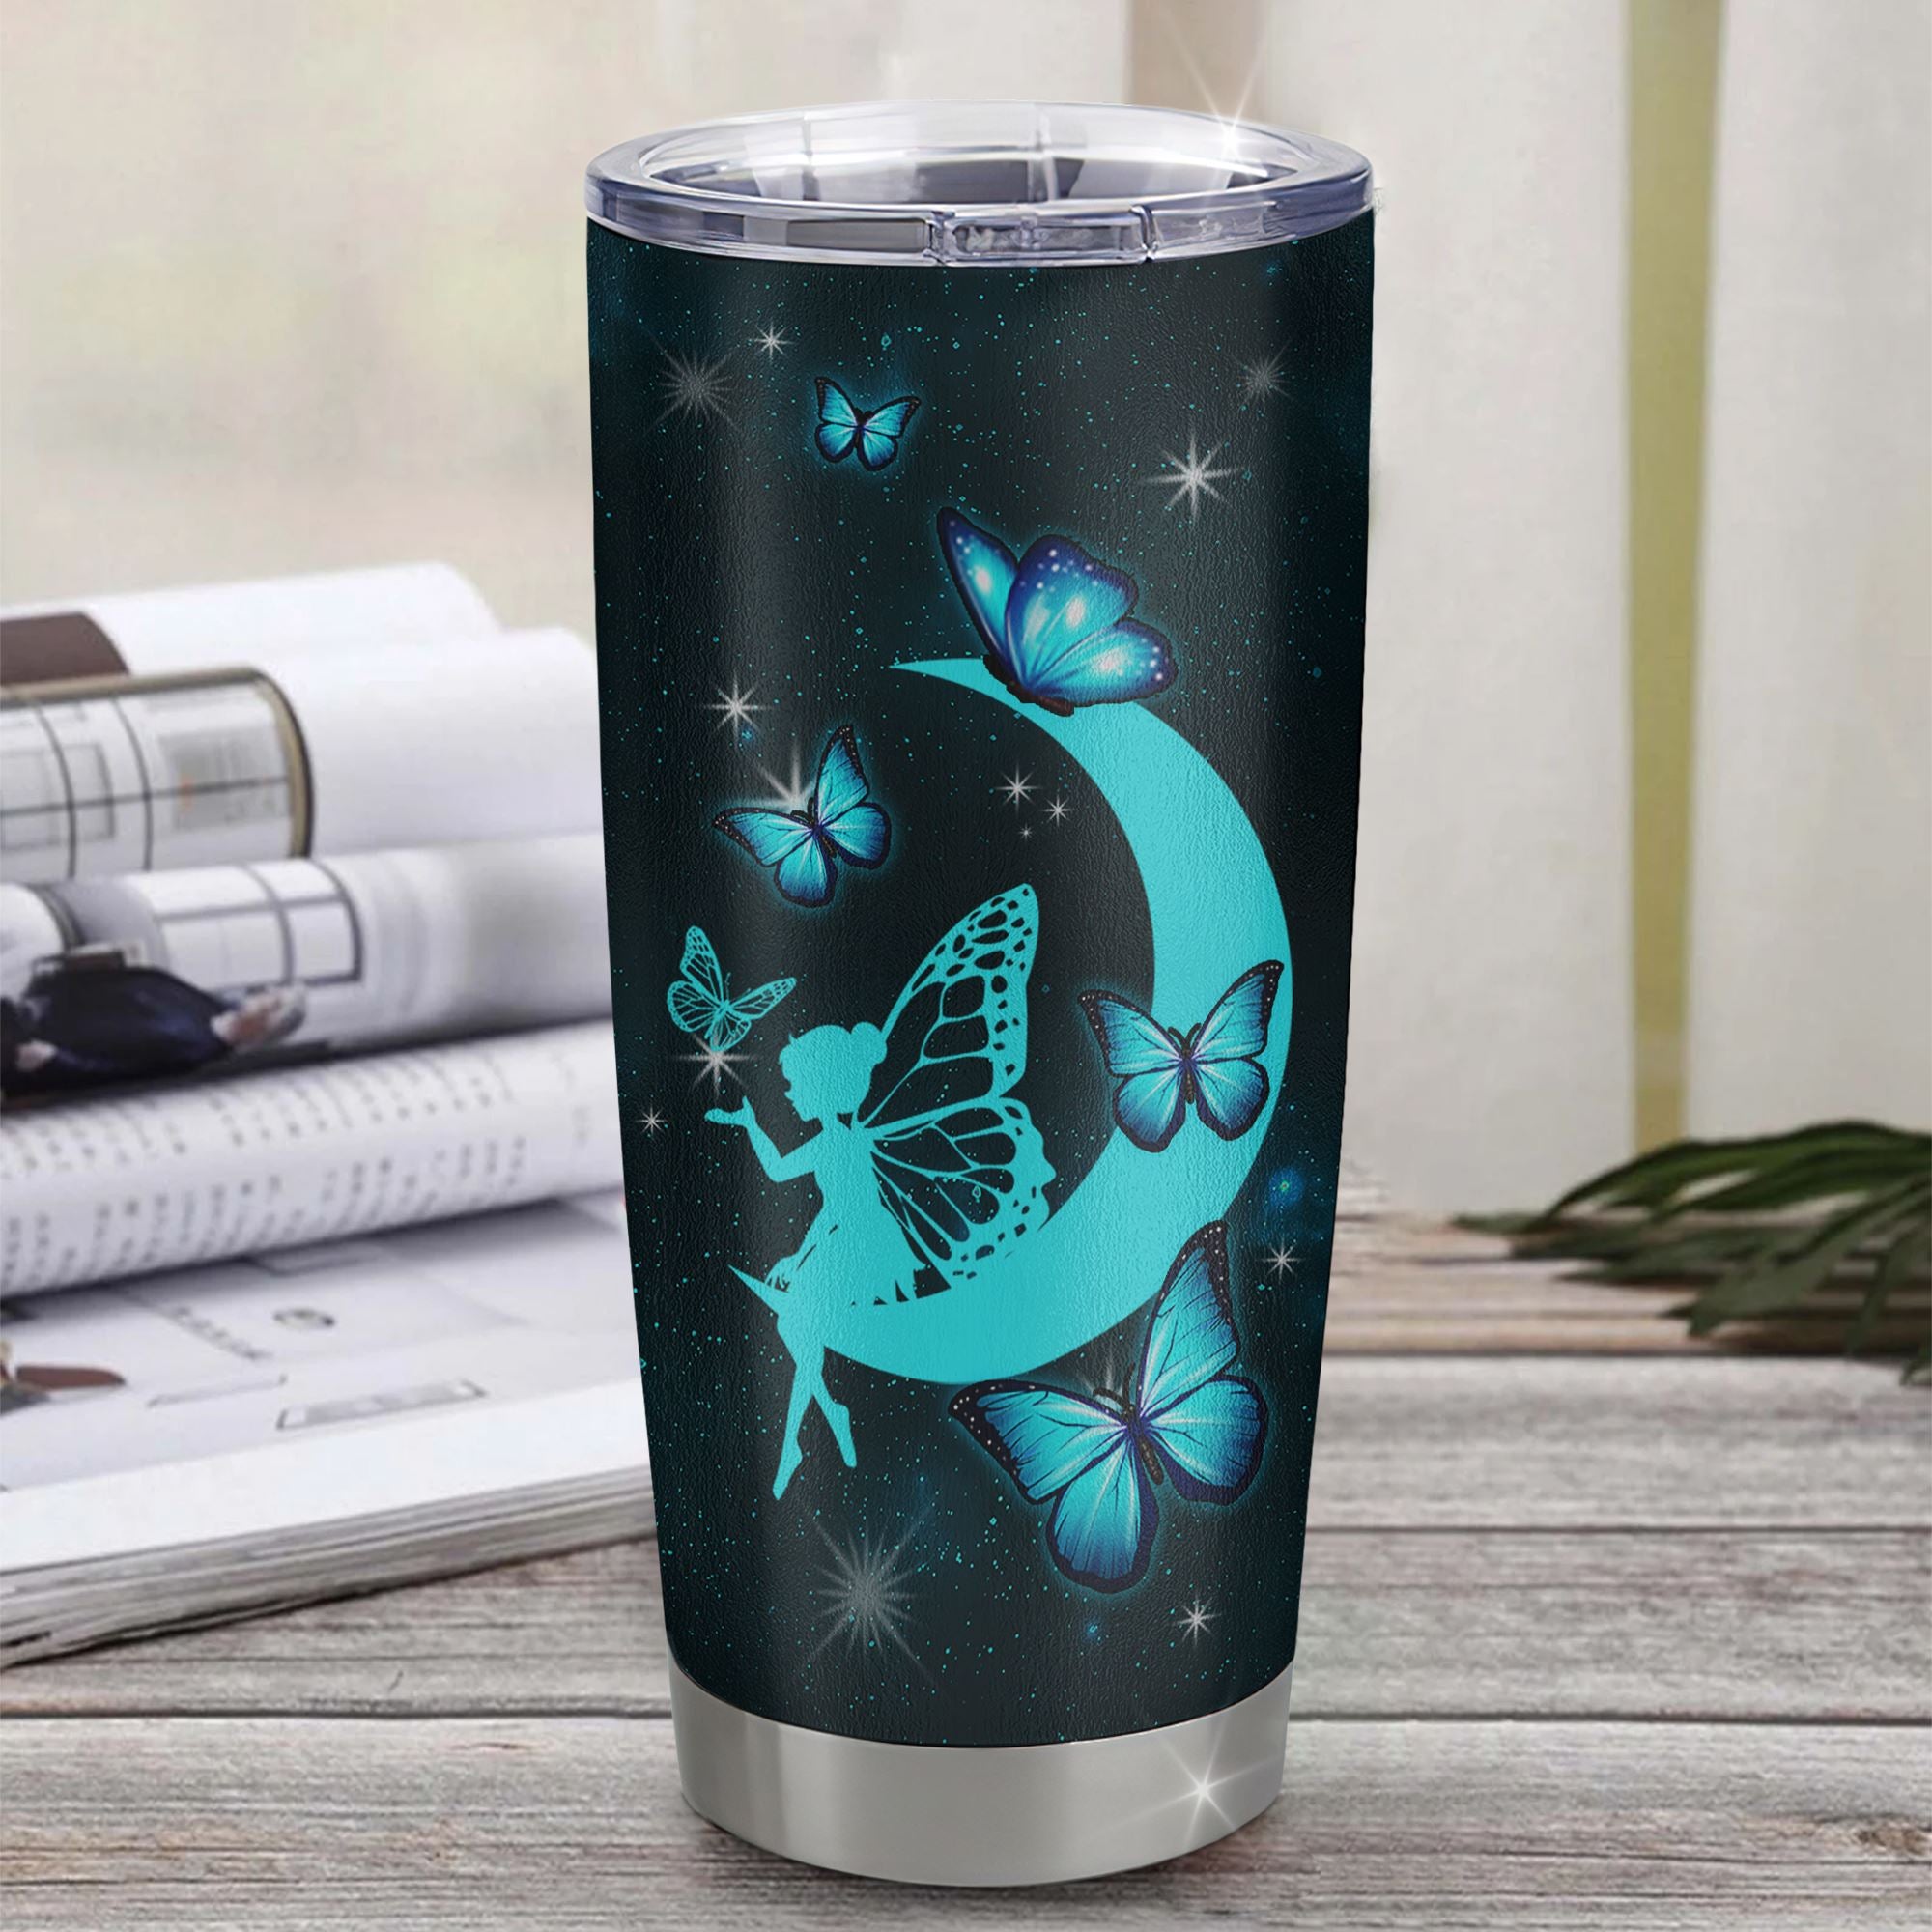 Personalized_To_My_Niece_Tumbler_From_Aunt_Auntie_Uncle_Stainless_Steel_Cup_Fairy_Silhouette_Fantasy_Moon_Niece_Birthday_Graduation_Christmas_Travel_Mug_Tumbler_mockup_1.jpg